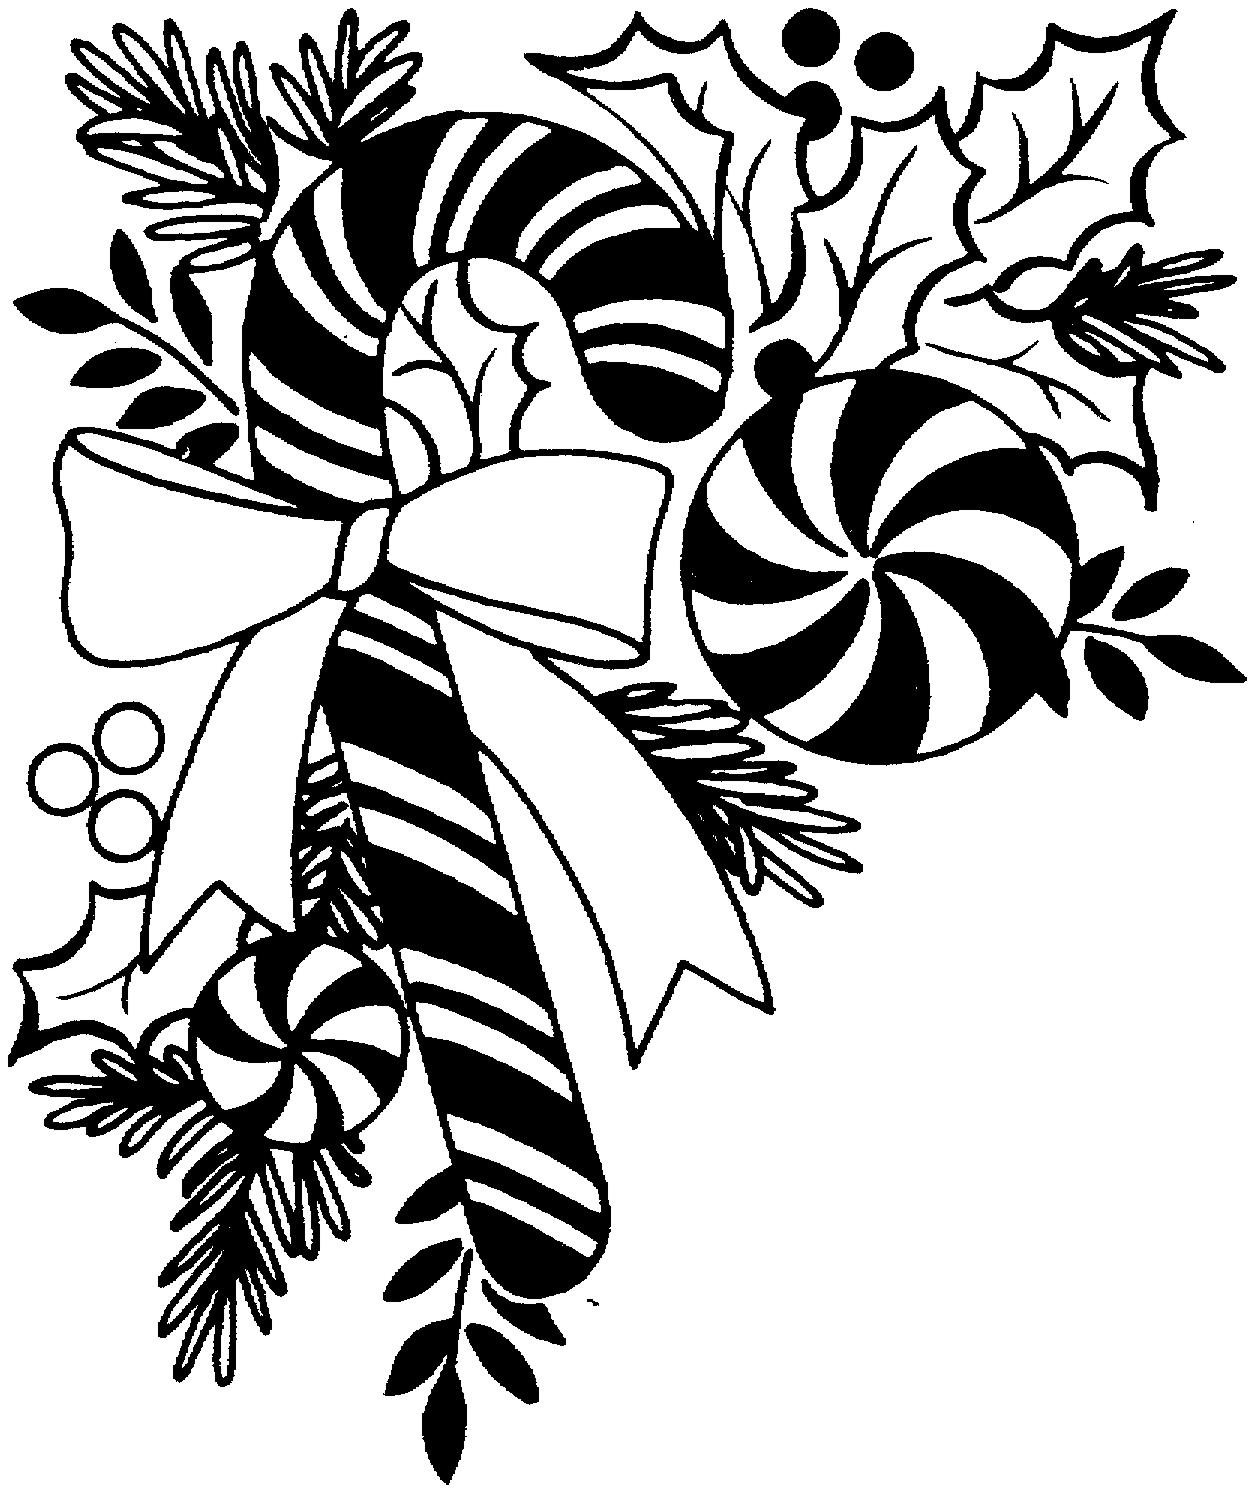 Free Black And White Christmas Borders, Download Free Clip